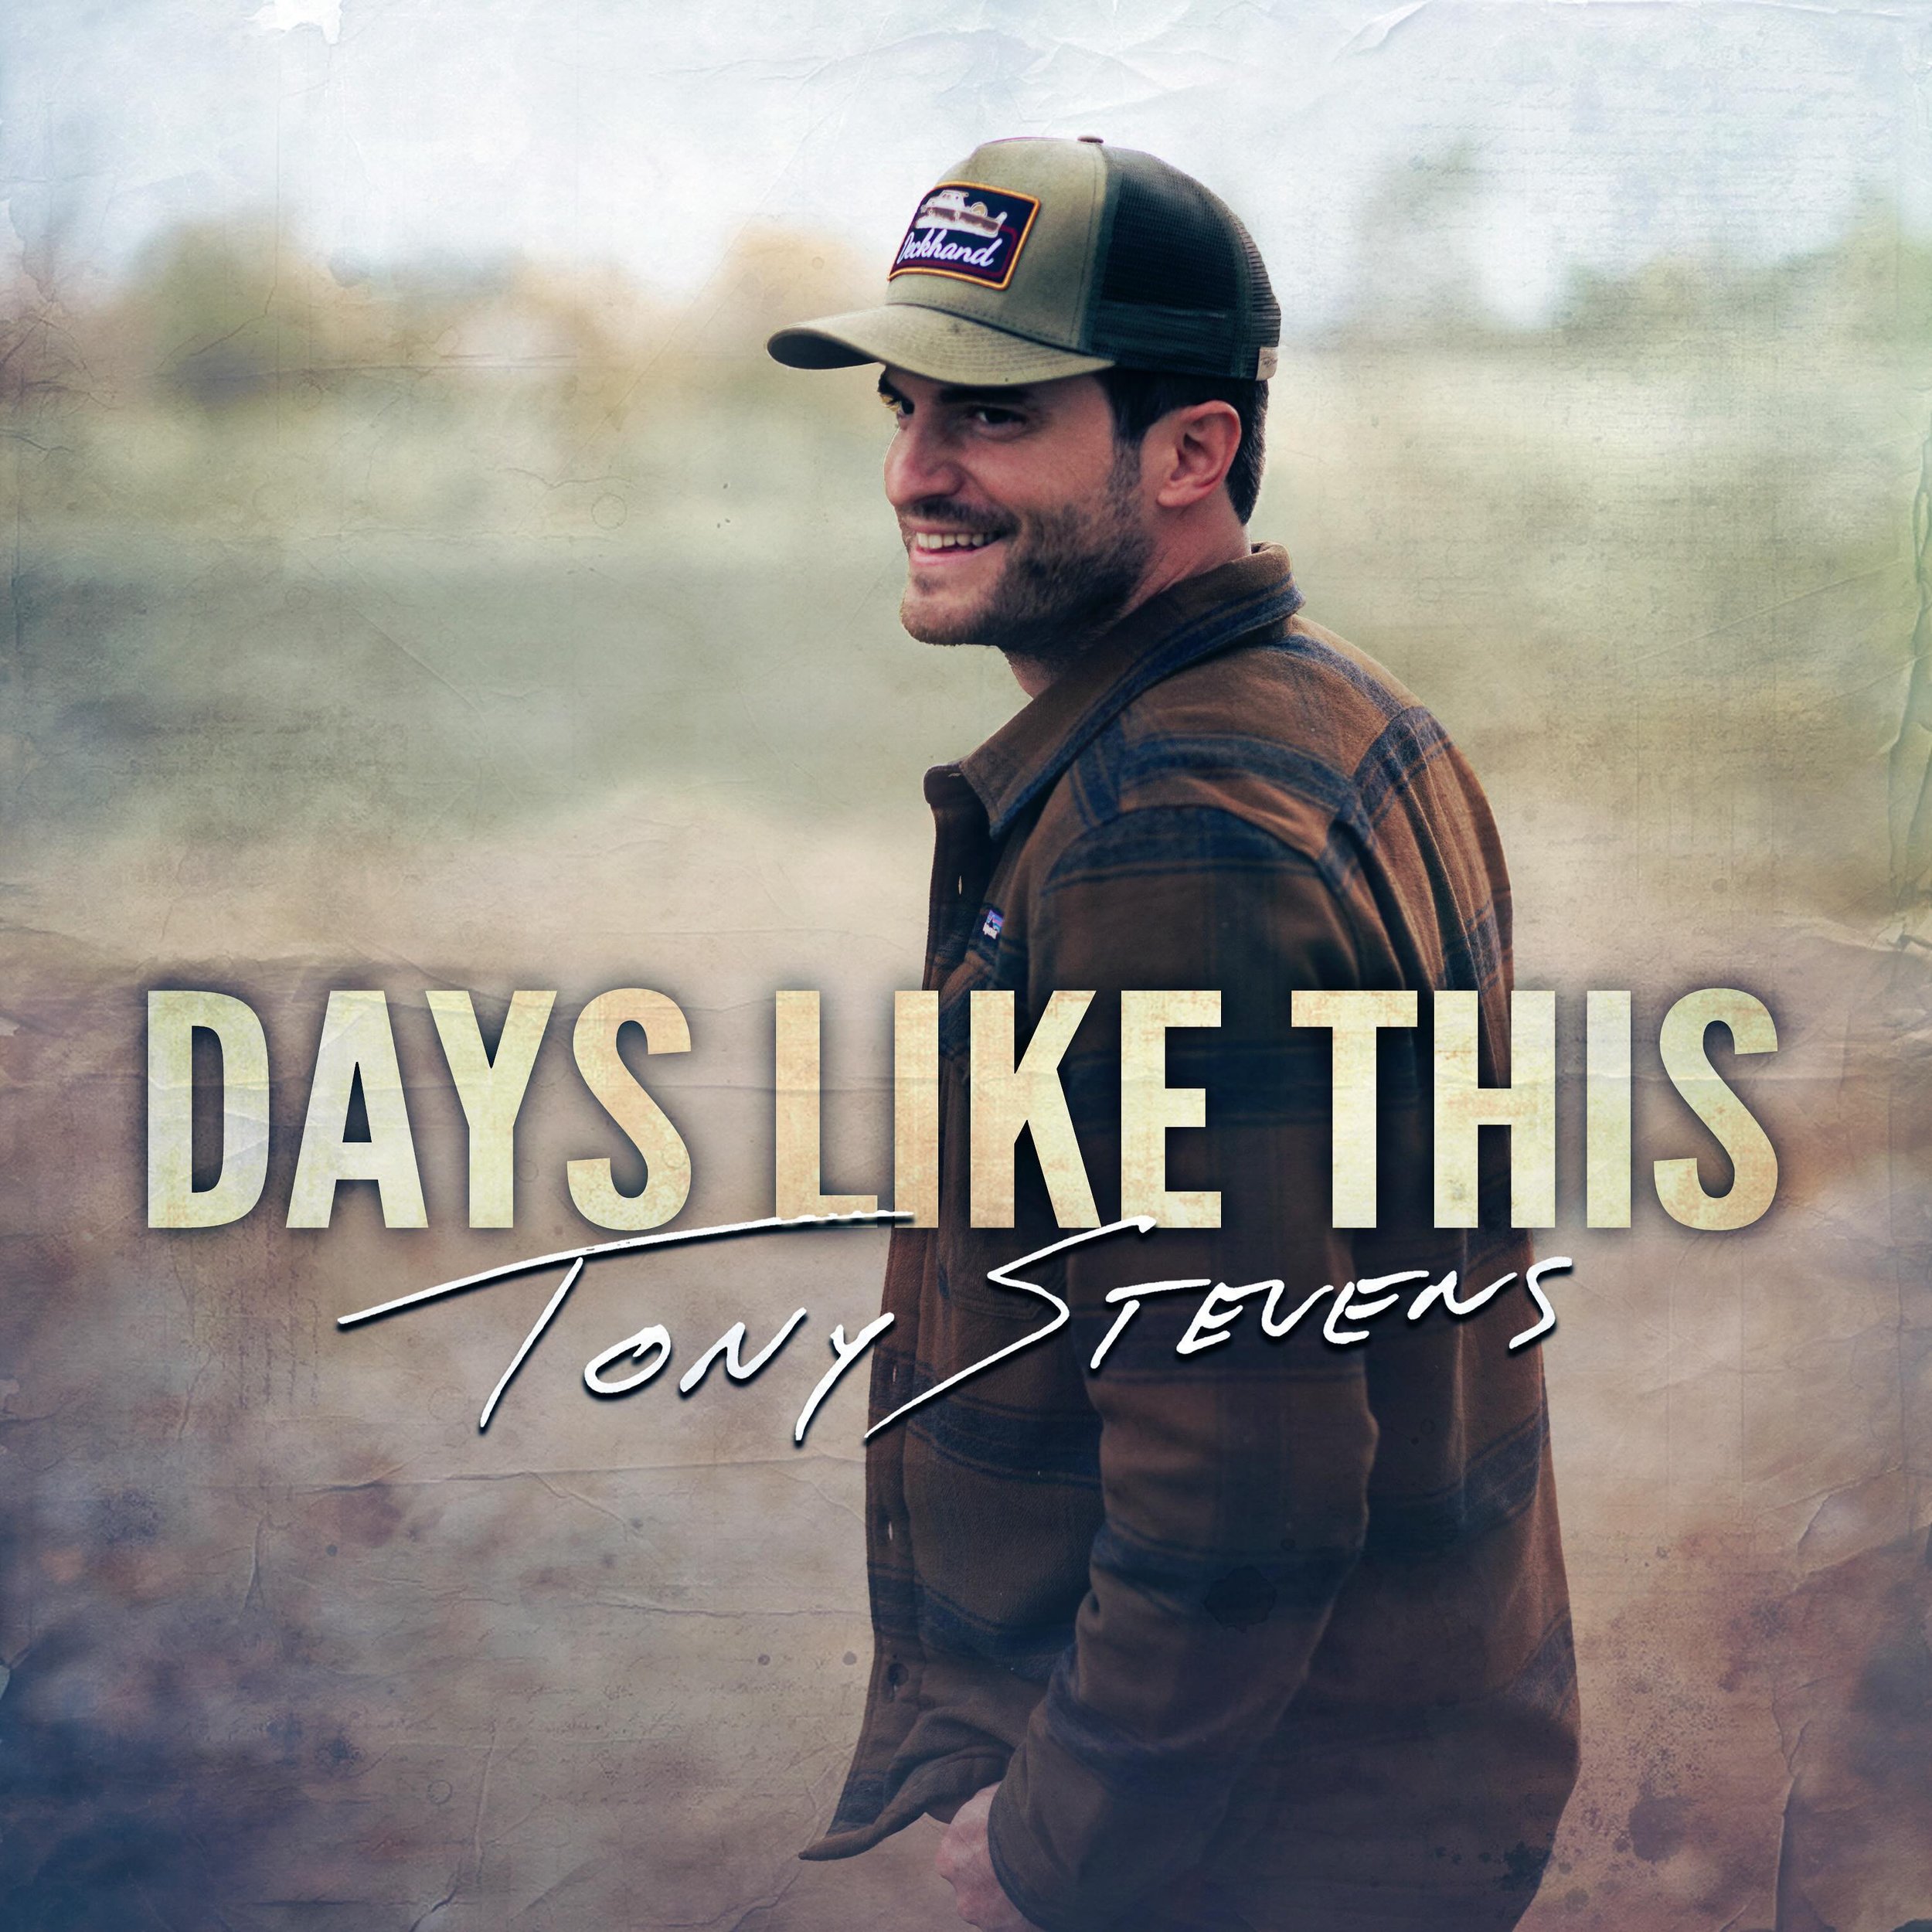 Days Like This!!! Available wherever you listen to music now! 🍻 🎣 🌅 Let me know what day this song makes you think about&hellip; 
.
.
.
#willingrecords #dayslikethis #newmusic